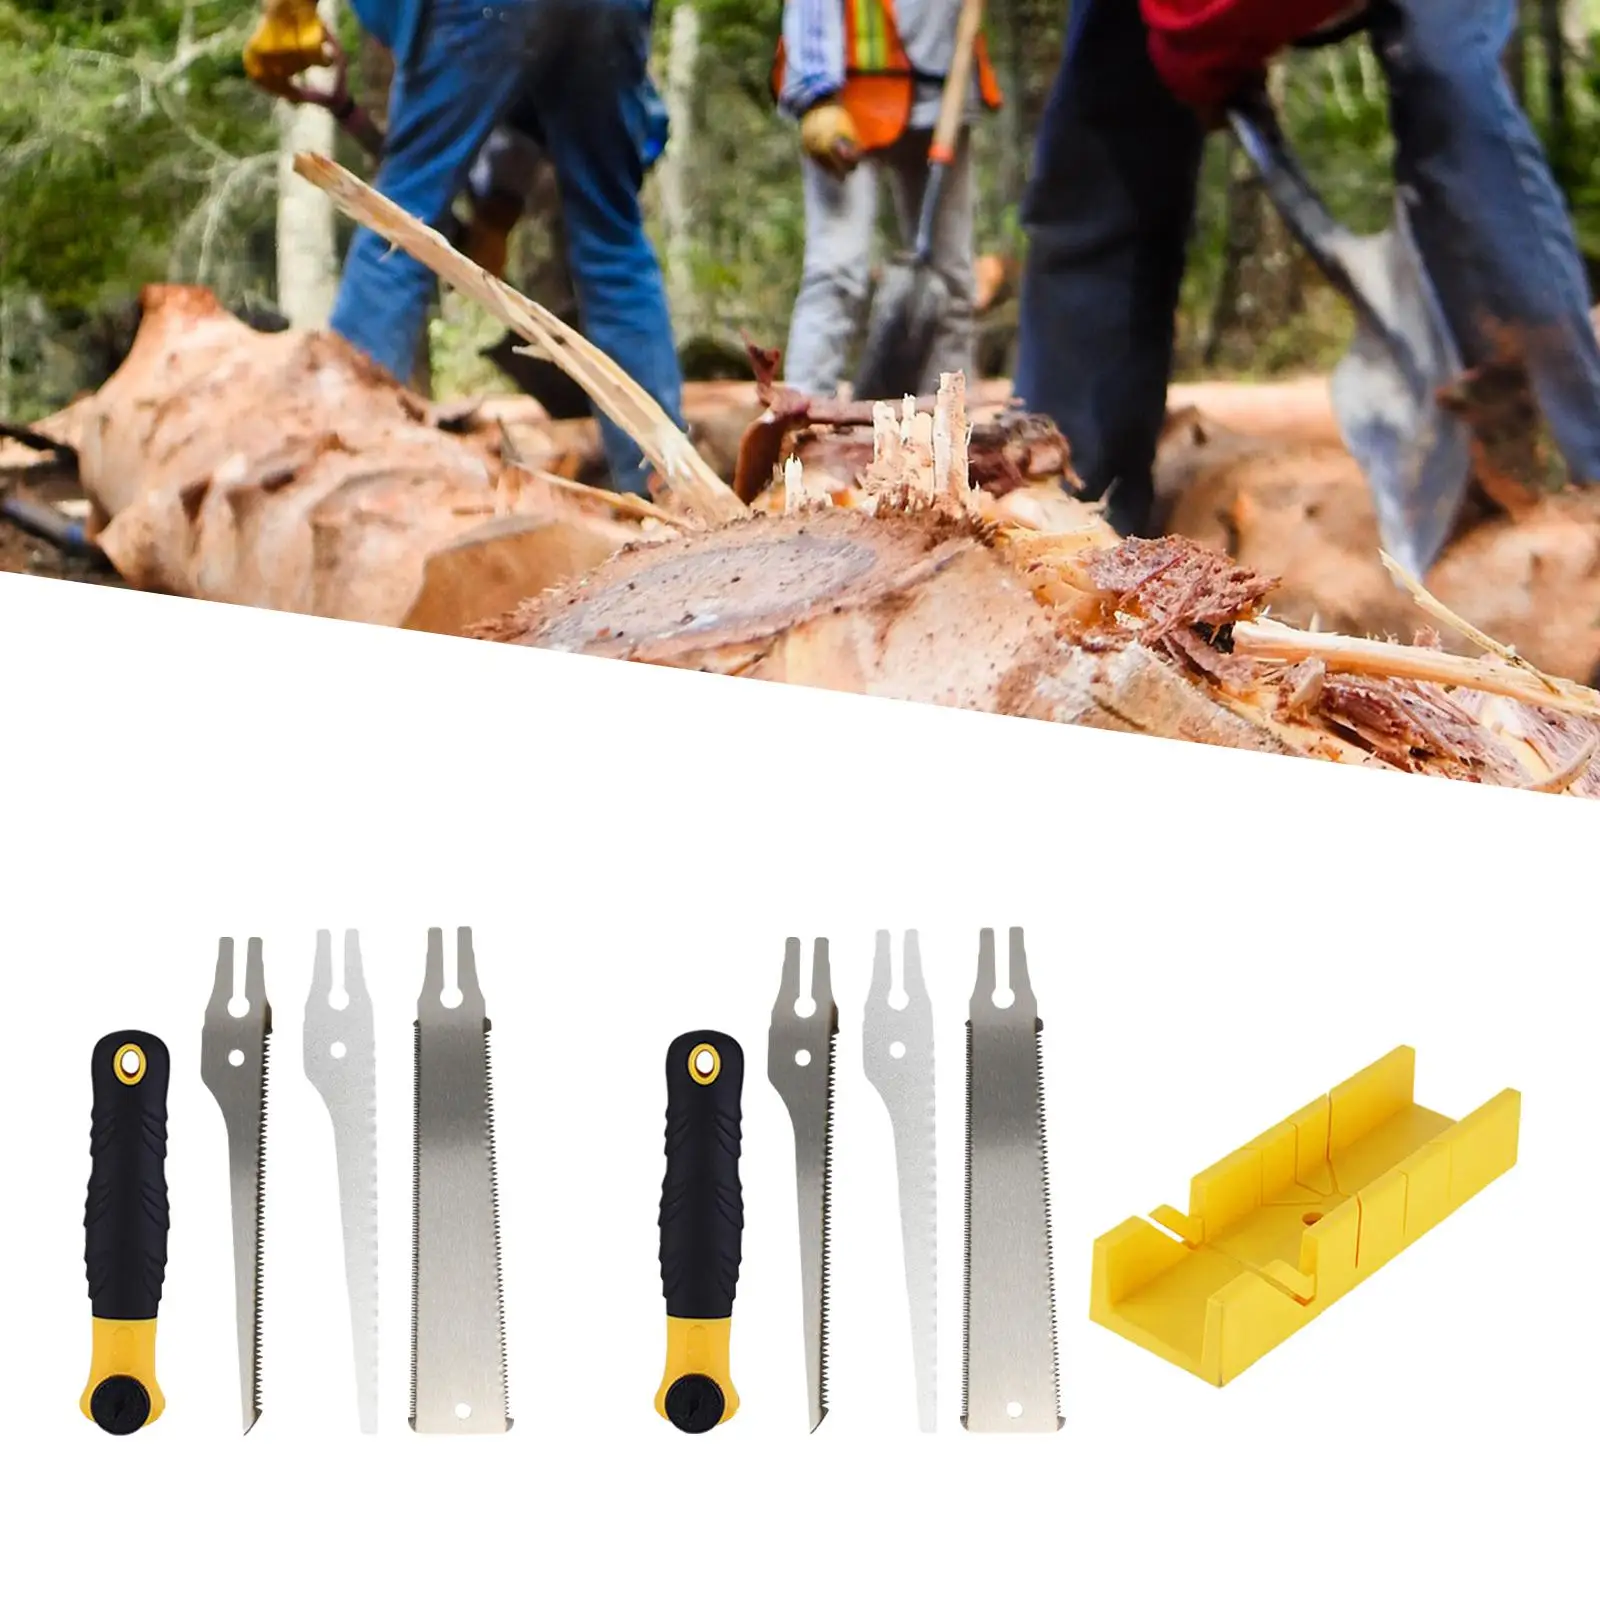 Manual Hand Saw Hand Tool Comfortable Handle Multipurpose Portable for Outdoor Trimming Branches Cutting DIY Pruning Trees